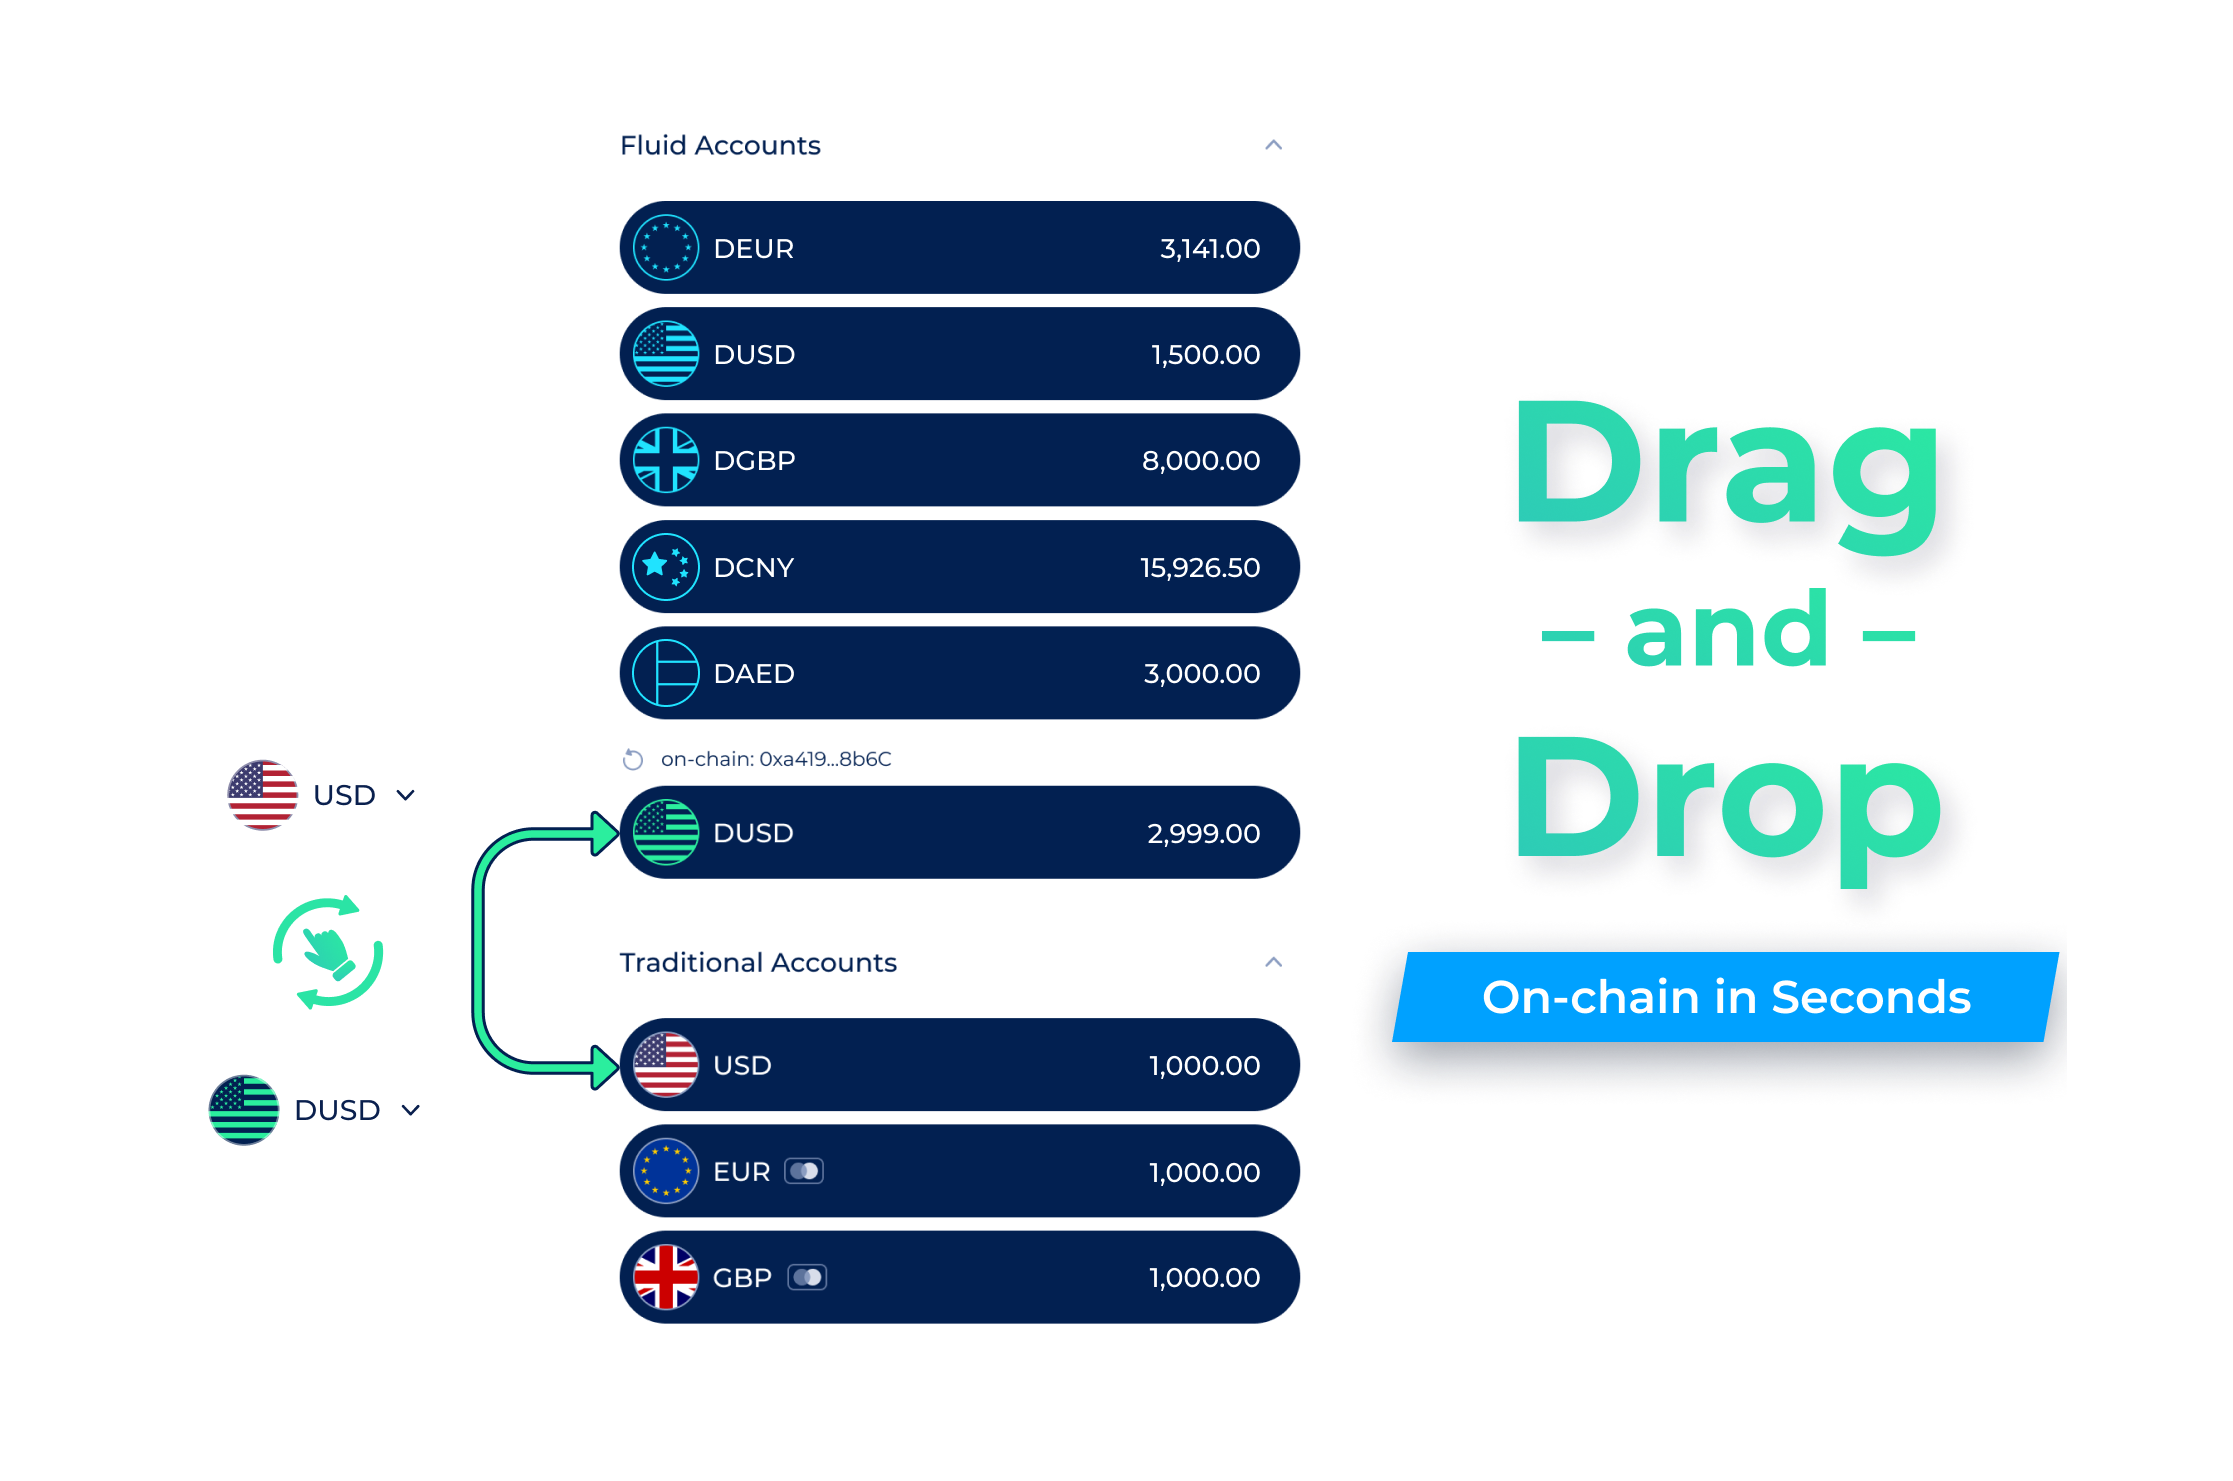 Drag and Drop, From your Fluid app, On-chain in Seconds